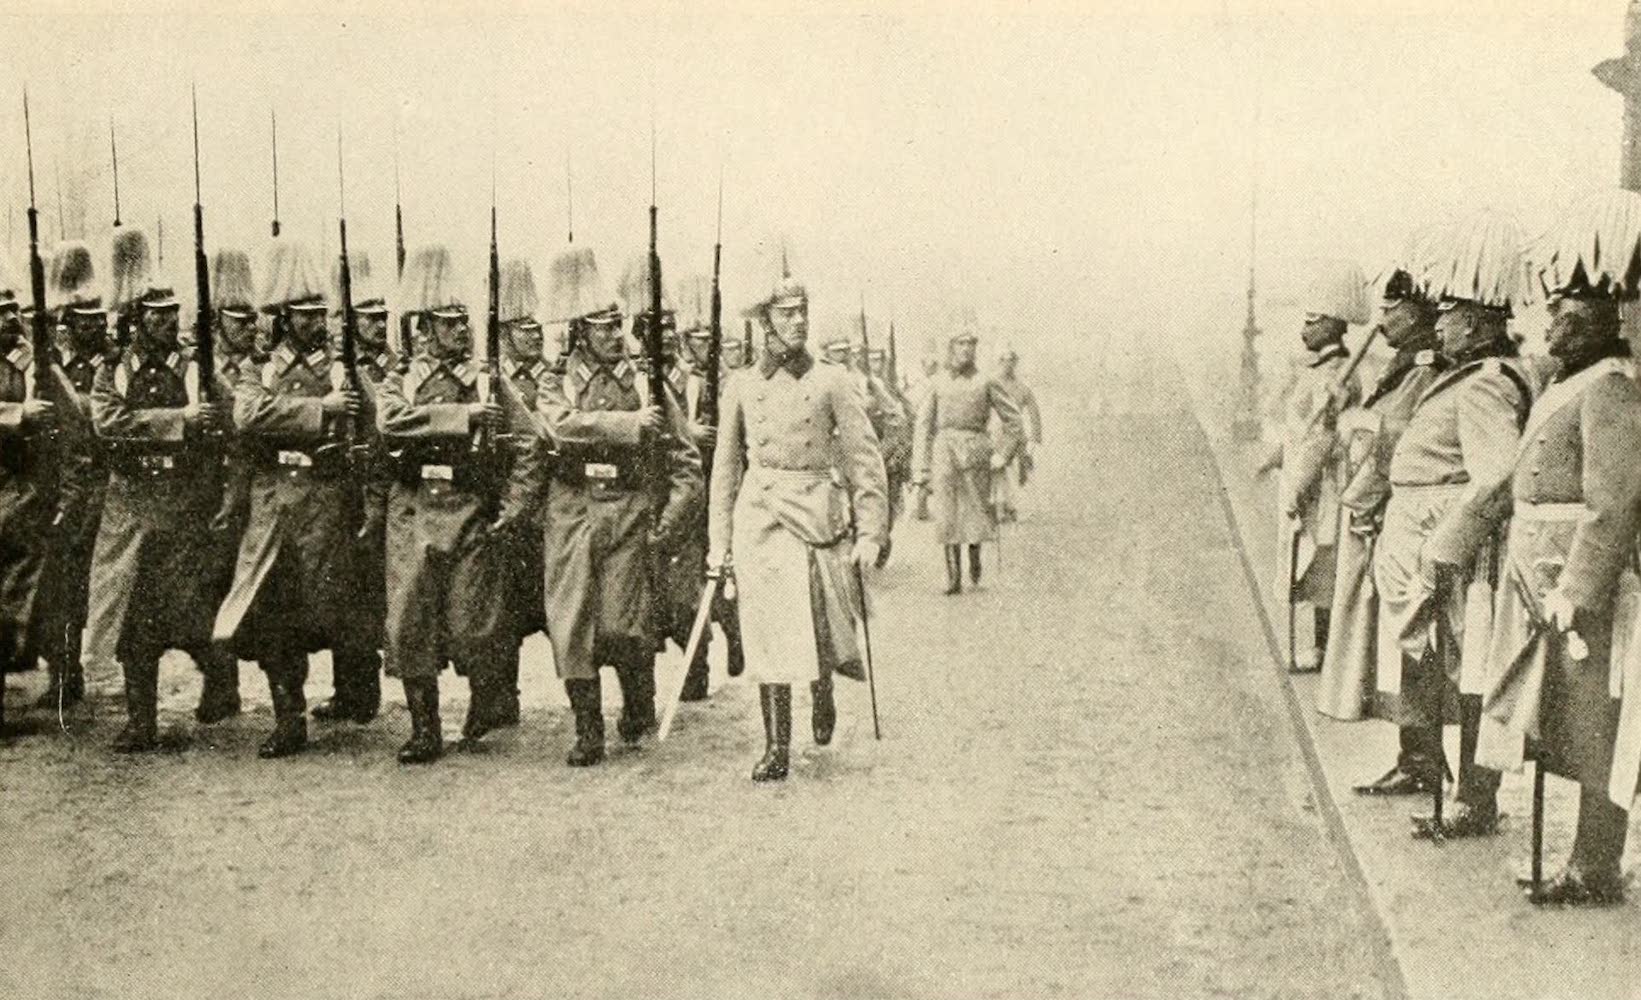 Laird & Lee's World's War Glimpses - Imperial Guard Passing in Review Before Their Emperor (1914)